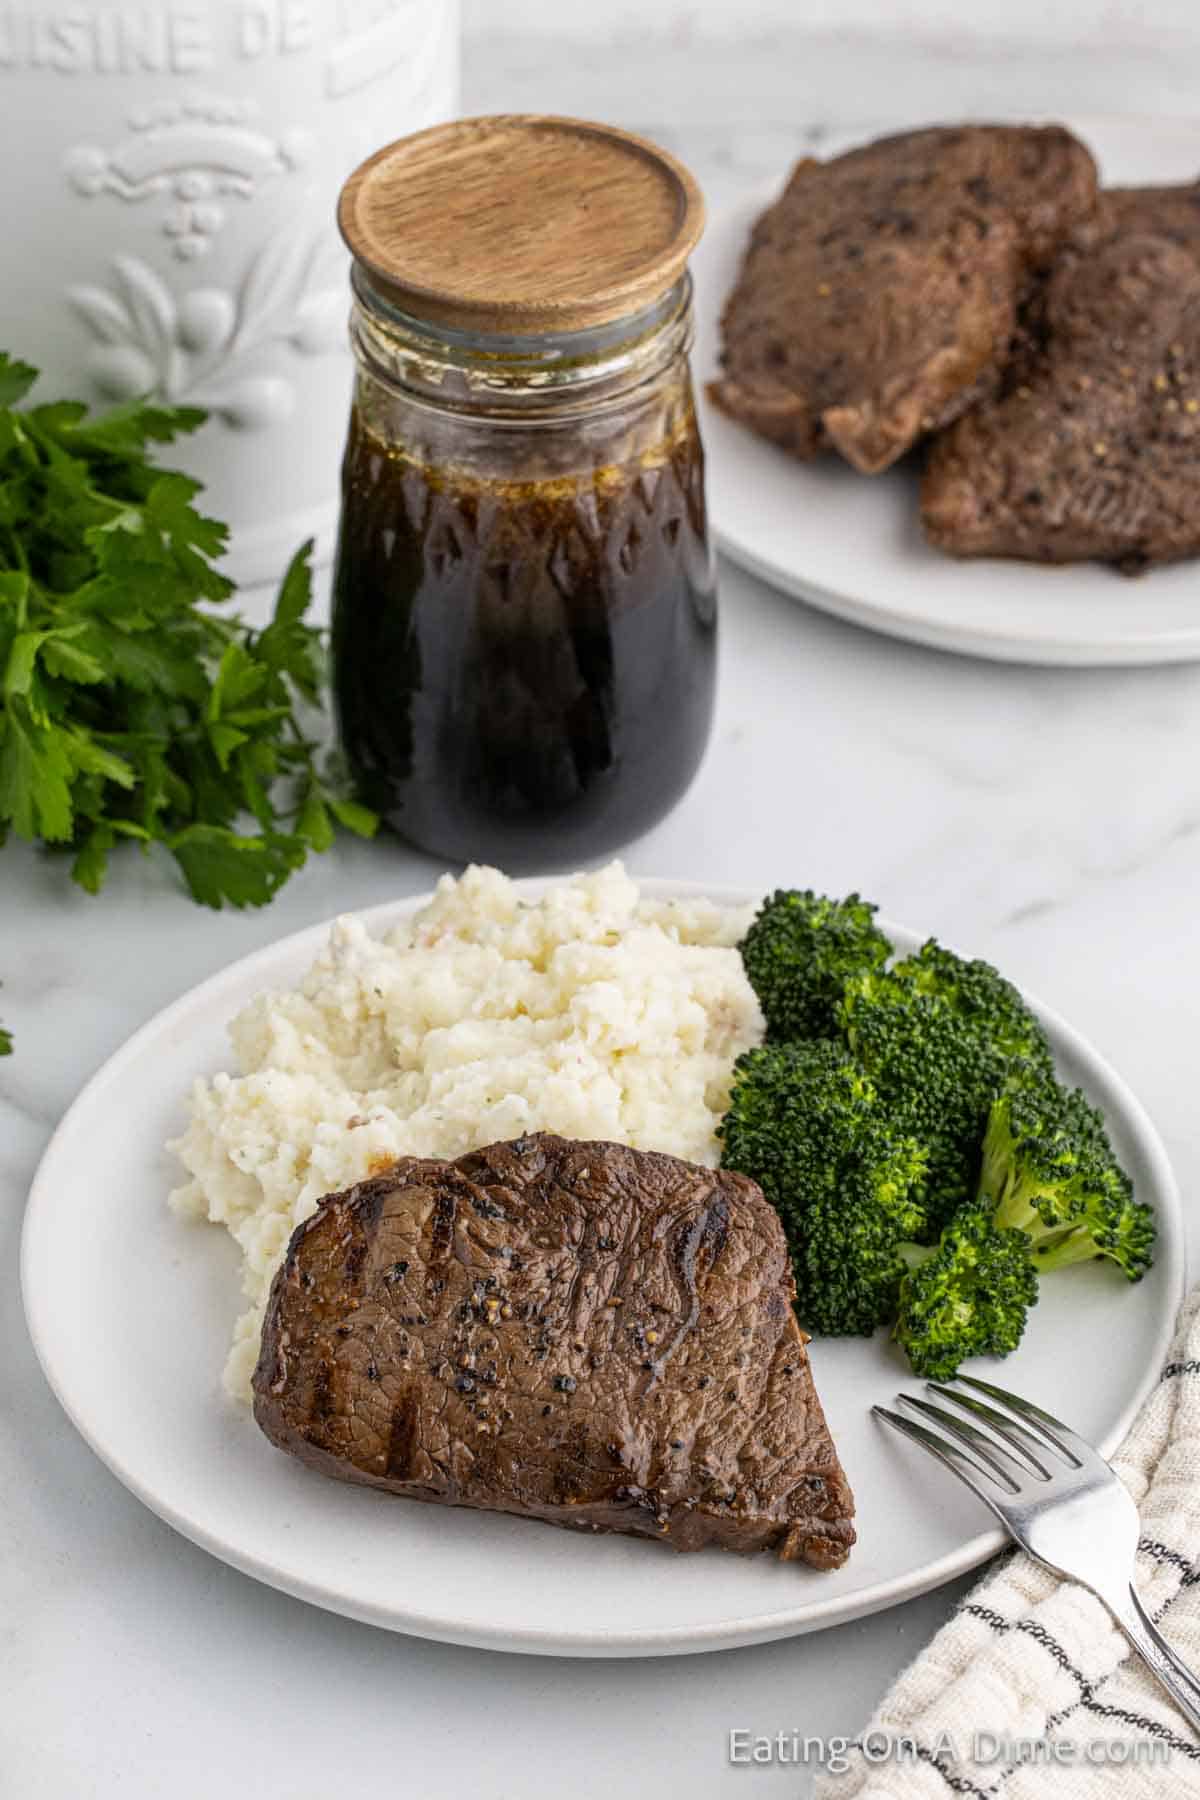 Grilled Steak on a plate with mashed potatoes and broccoli with a jar of marinade on the side